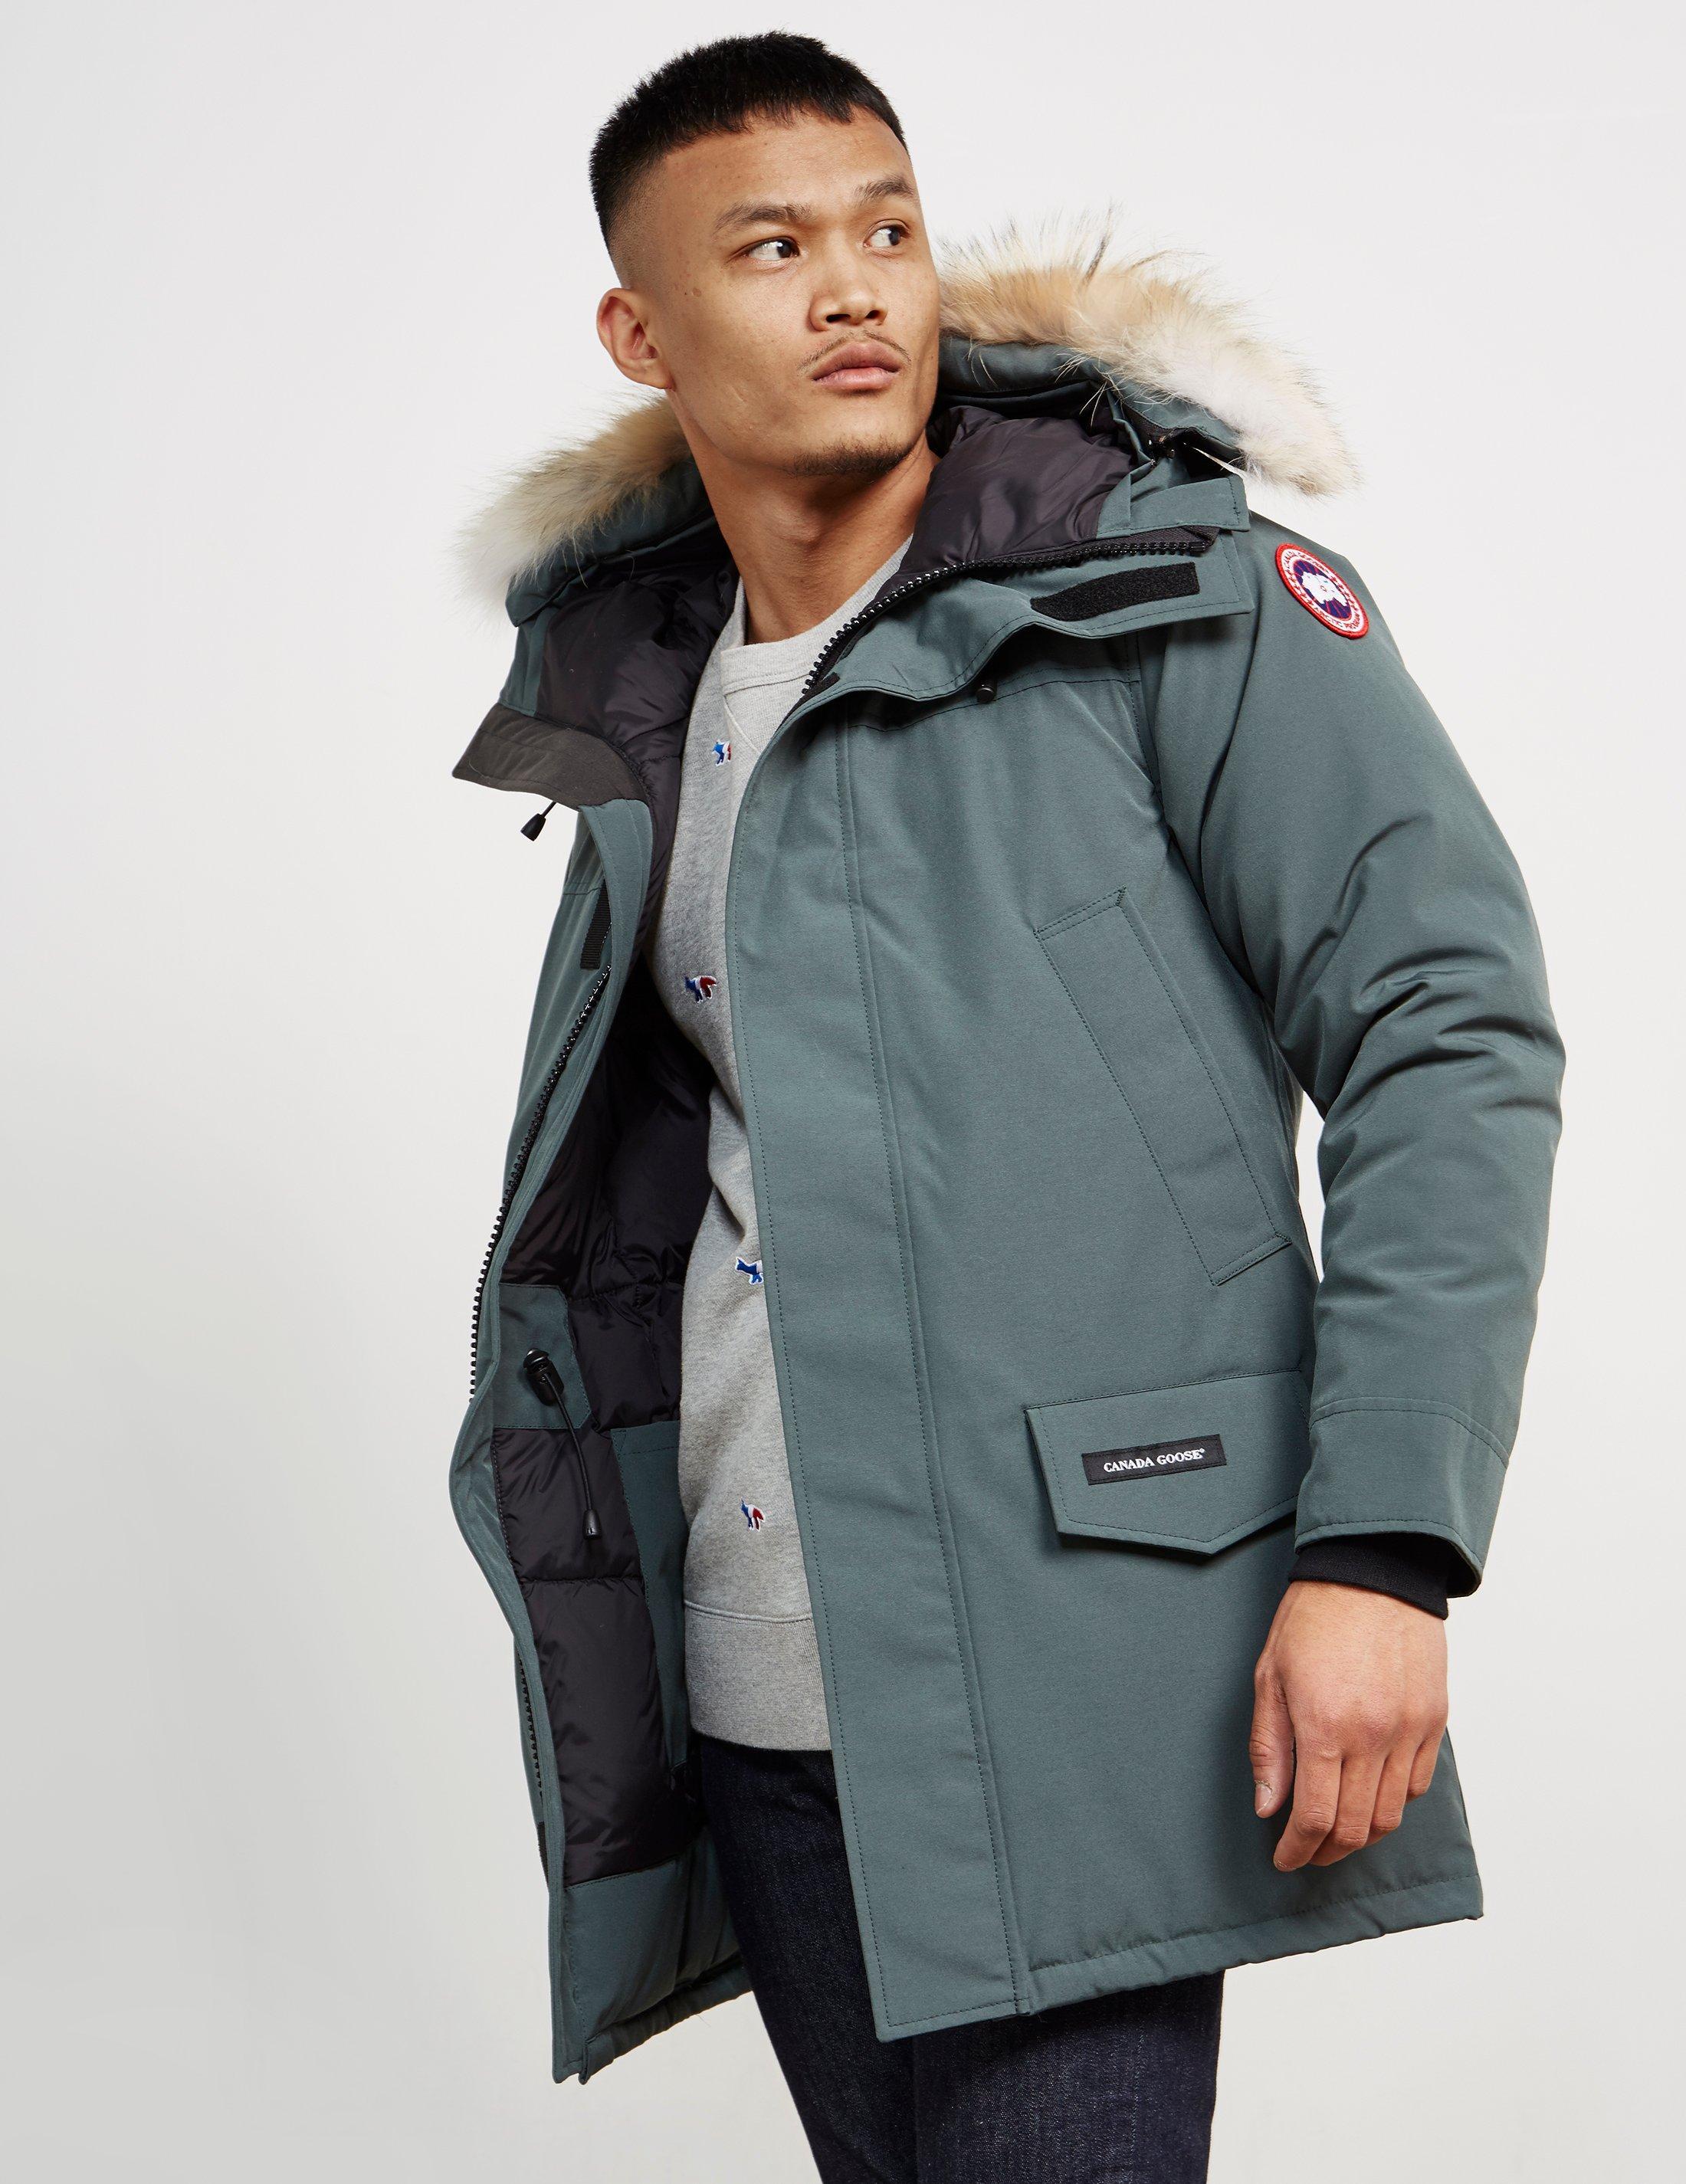 Au! 13+ Lister over Canada Goose Jacke: To be human is to be part of ...